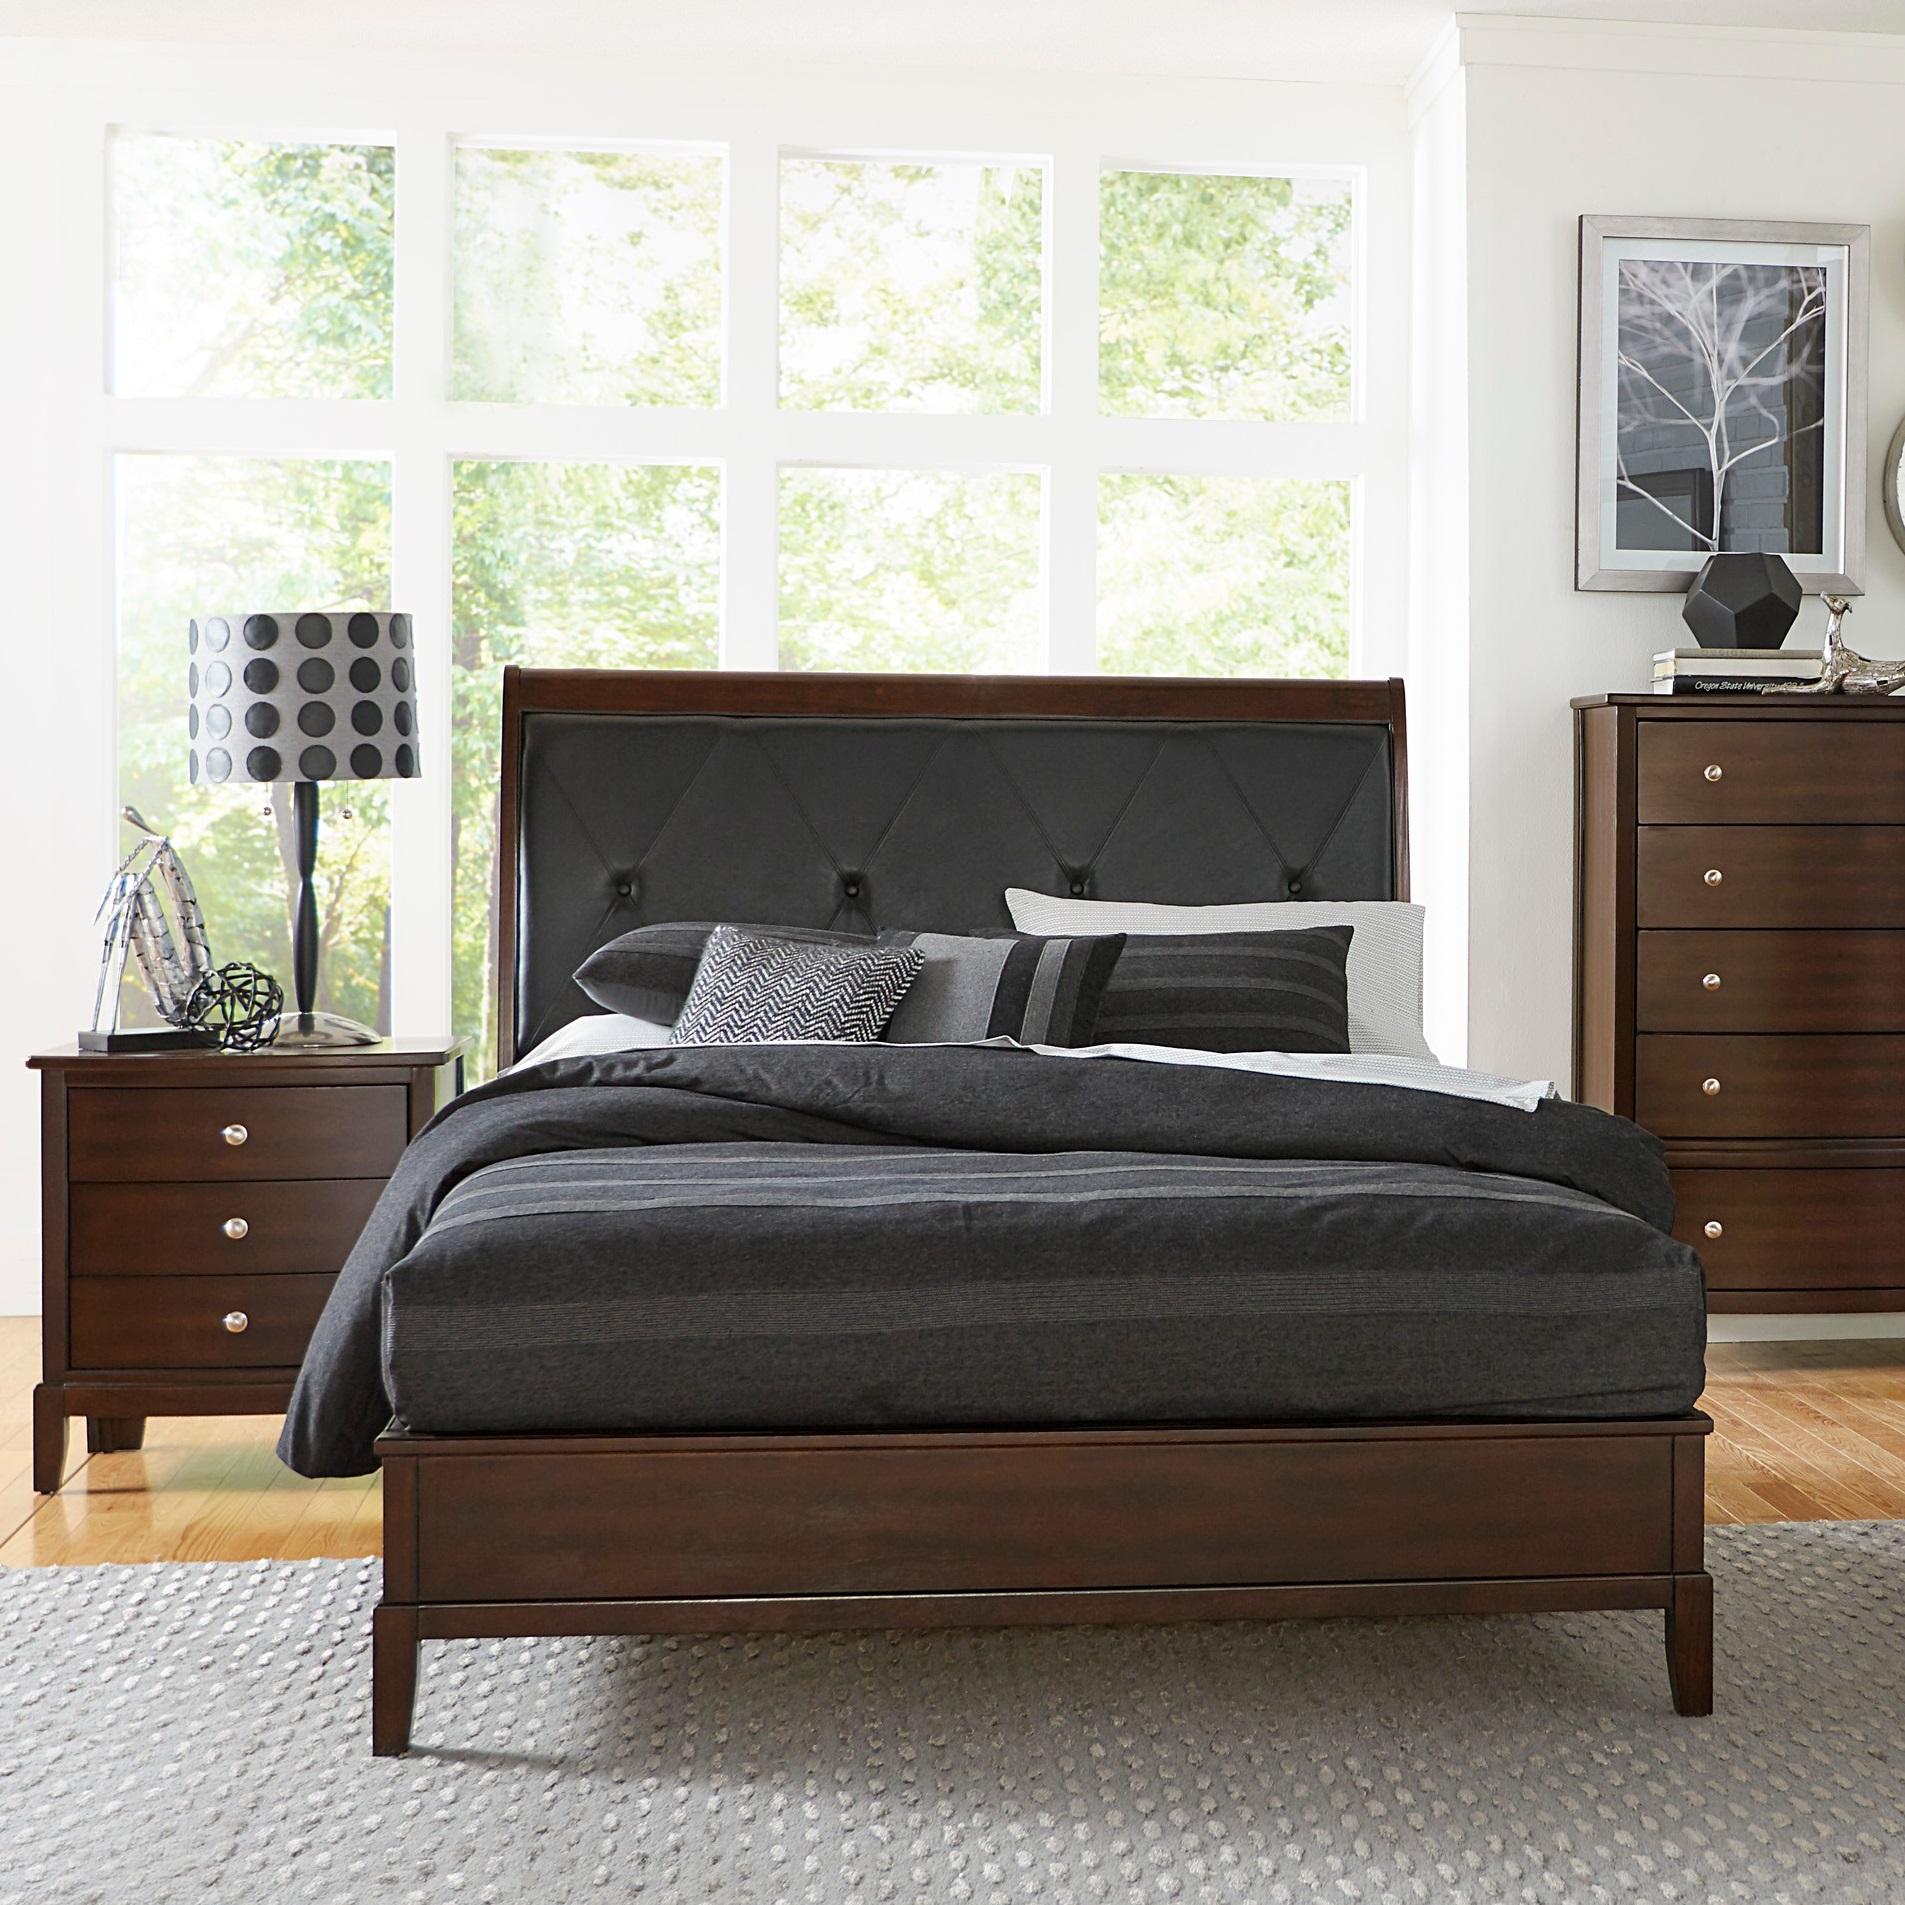 Transitional Bedroom Set 1730F-1-3PC Cotterill 1730F-1-3PC in Dark Cherry Faux Leather